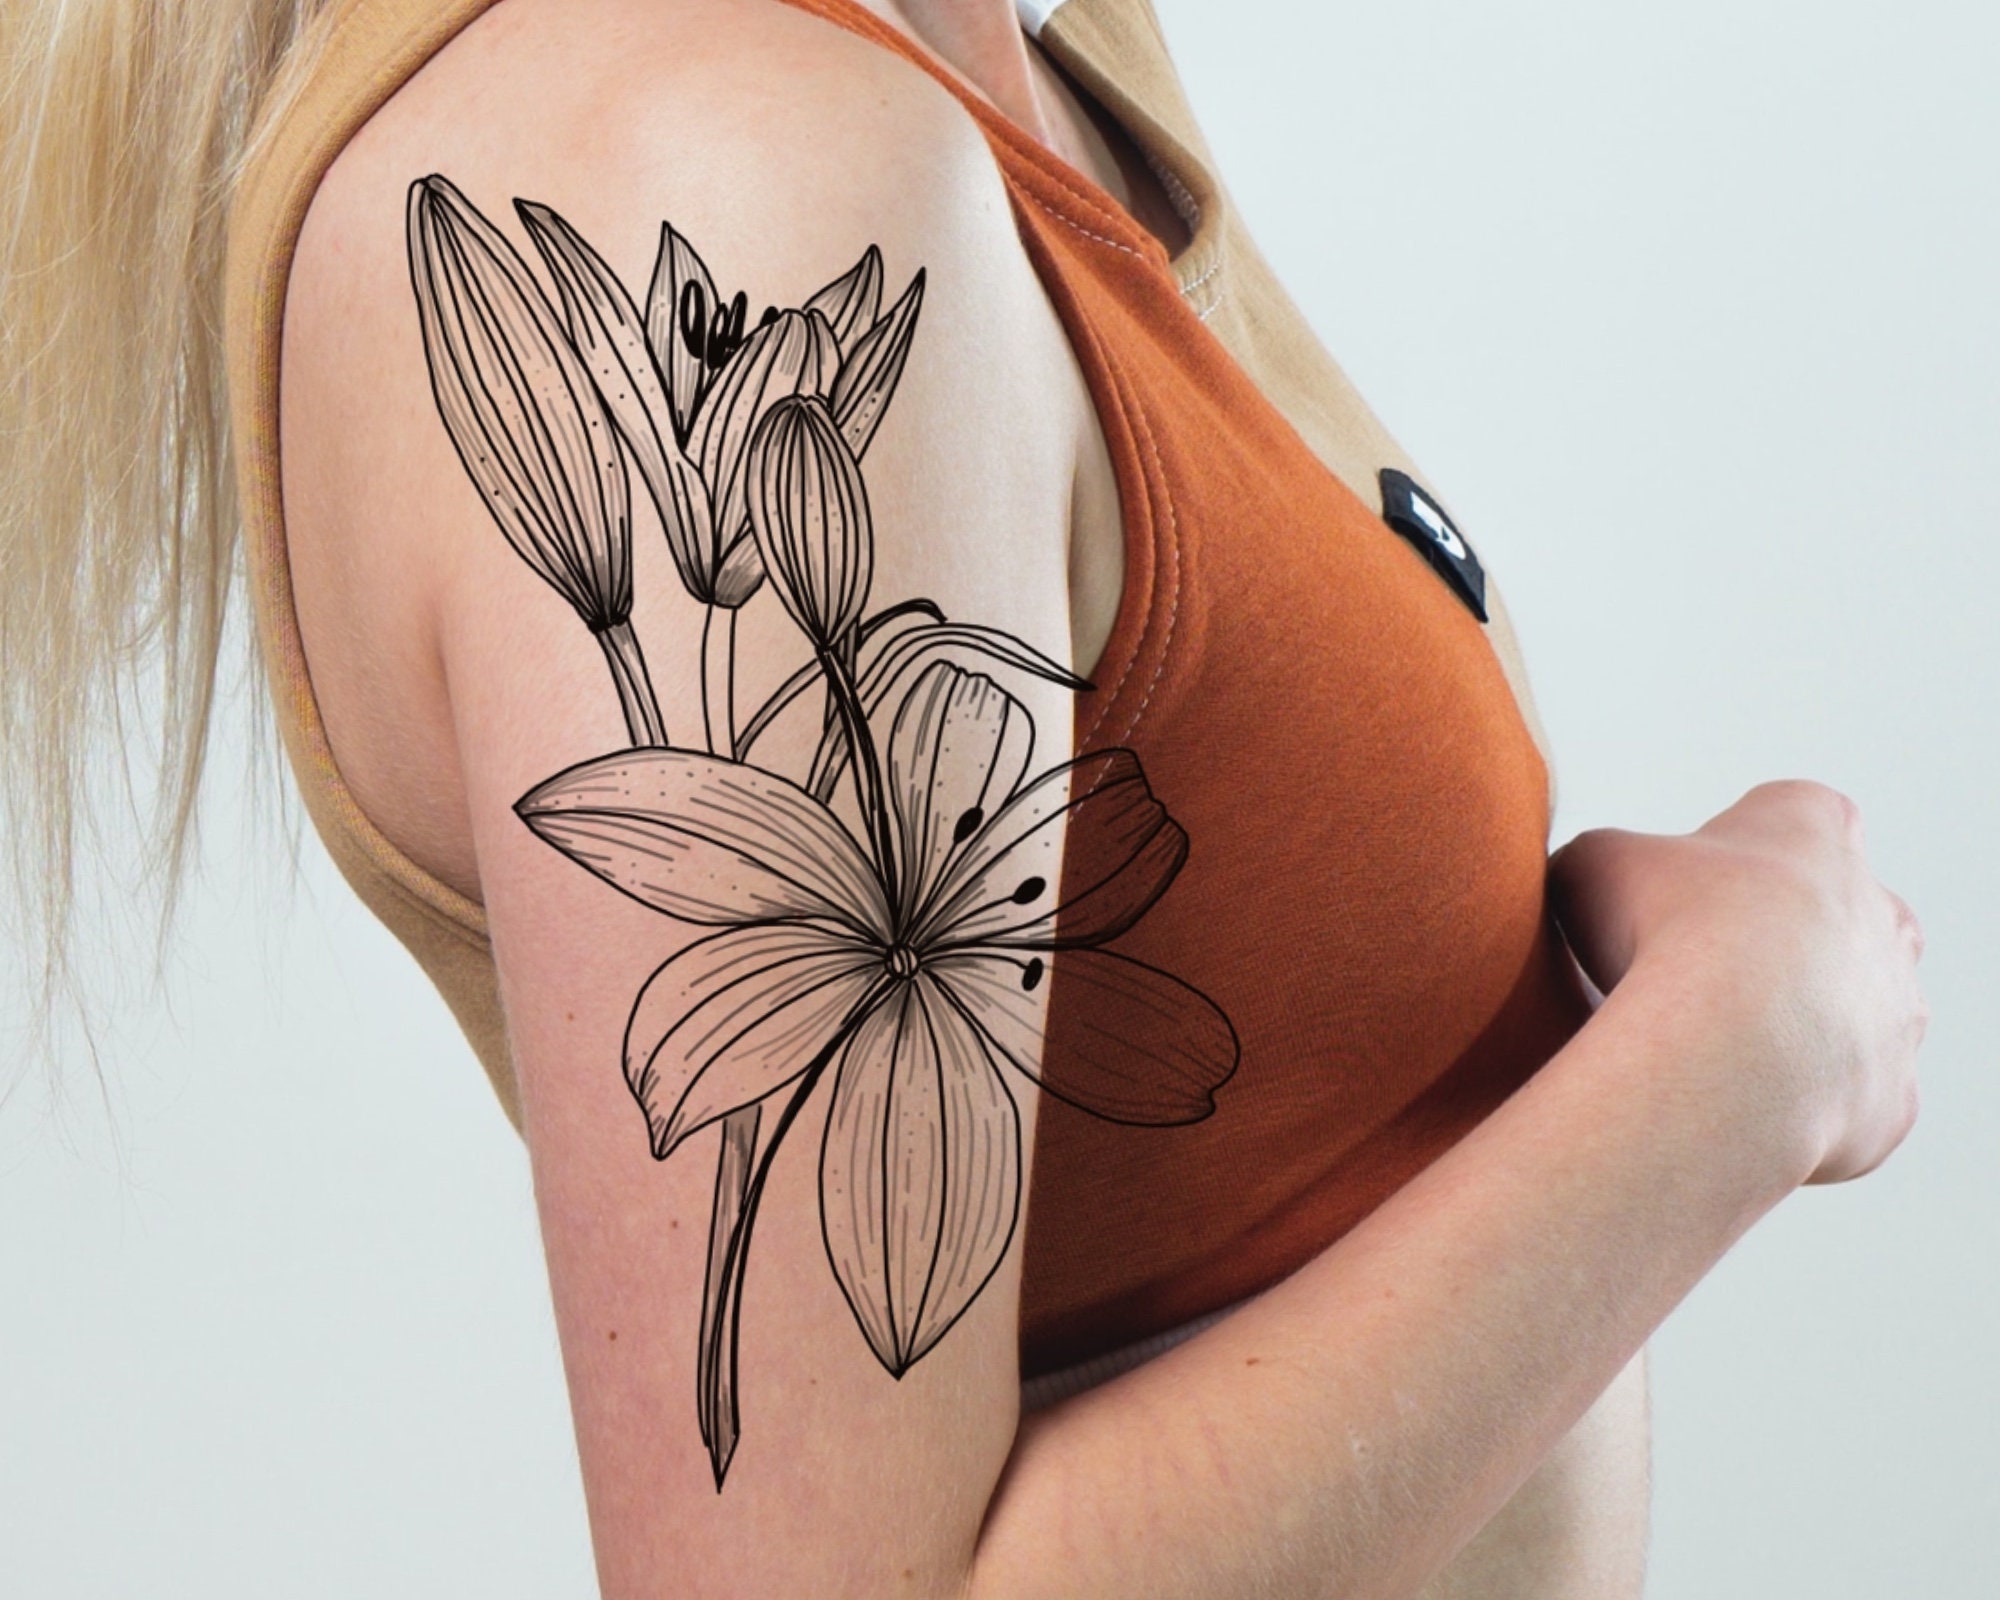 Did a few lilies for Lilly .. and by Lilly I mean Ellie #lily #tattoo  #iloveyou #tattoos #lilytattoo #fineline #delicate #art